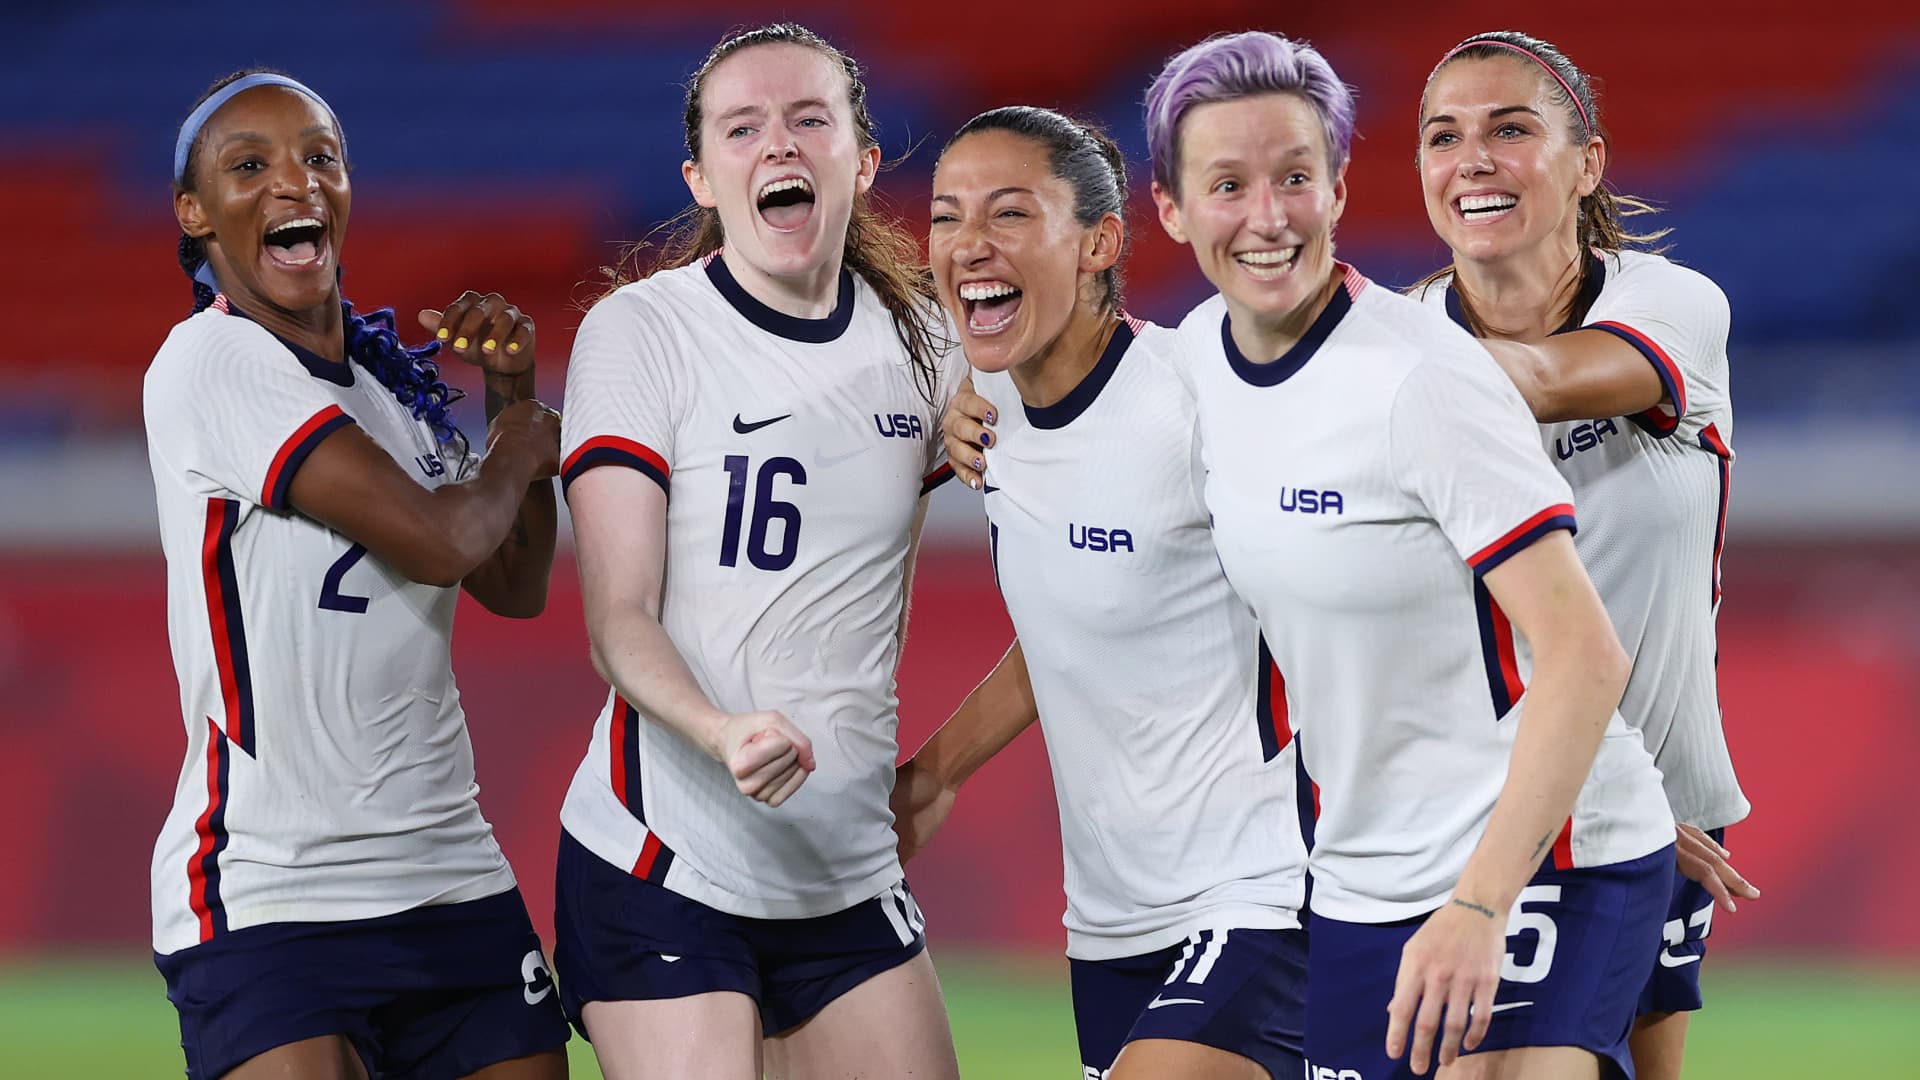 Crystal Dunn, Rose Lavelle, Christen Press, Megan Rapinoe and Alex Morgan of Team United States celebrate following their team's victory in the penalty shoot out after the Women's Quarter Final match between Netherlands and United States on day seven of the Tokyo 2020 Olympic Games at International Stadium Yokohama on July 30, 2021 in Yokohama, Kanagawa, Japan.